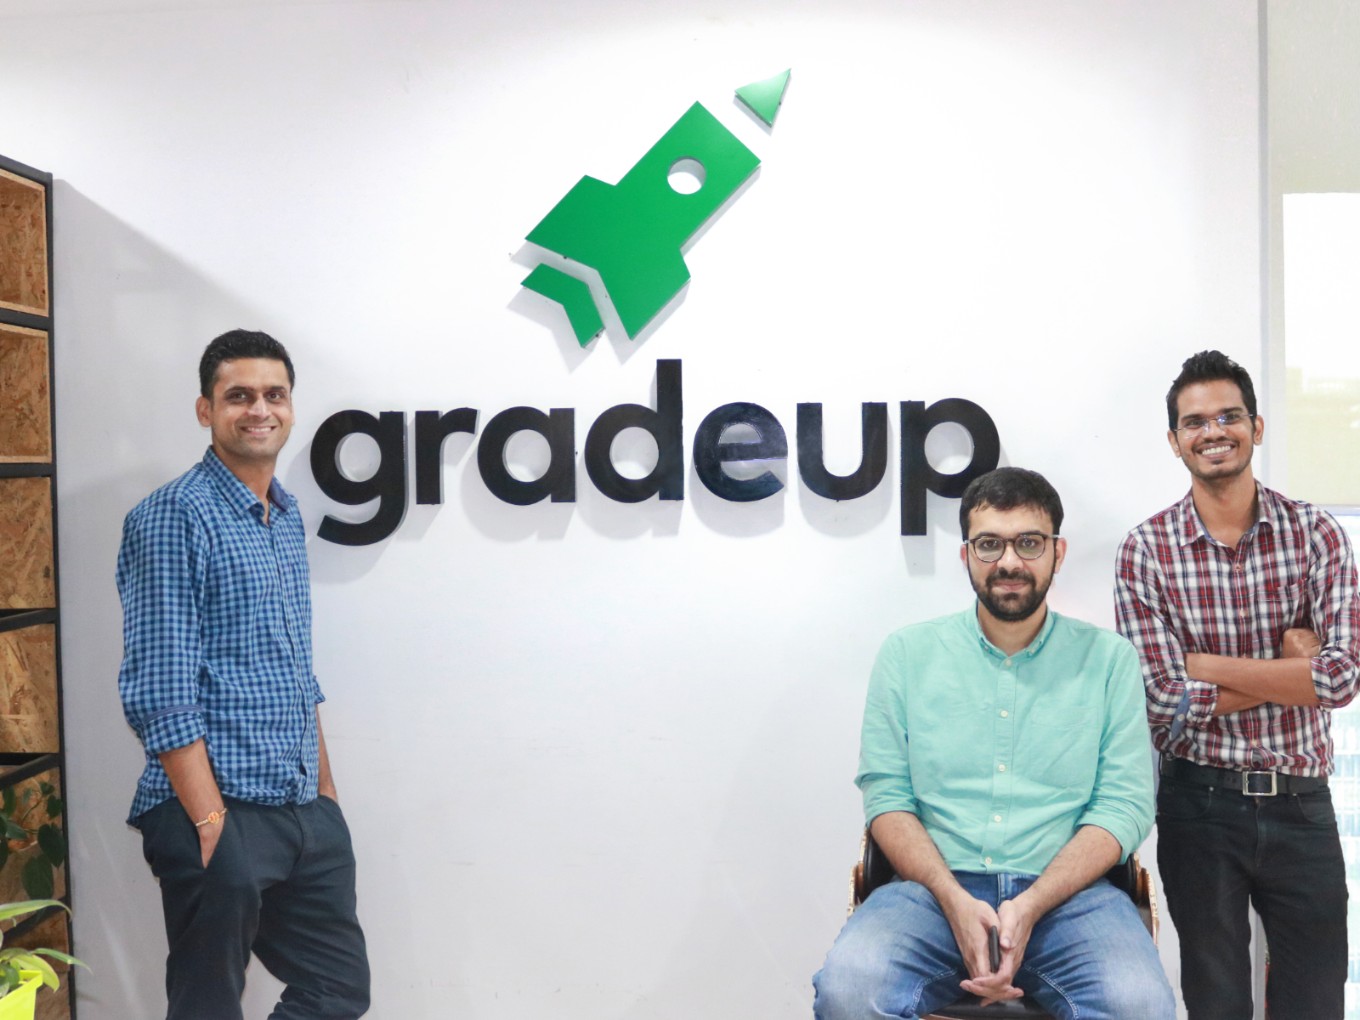 Gradeup Takes Community Approach To Win India's Test Prep Market